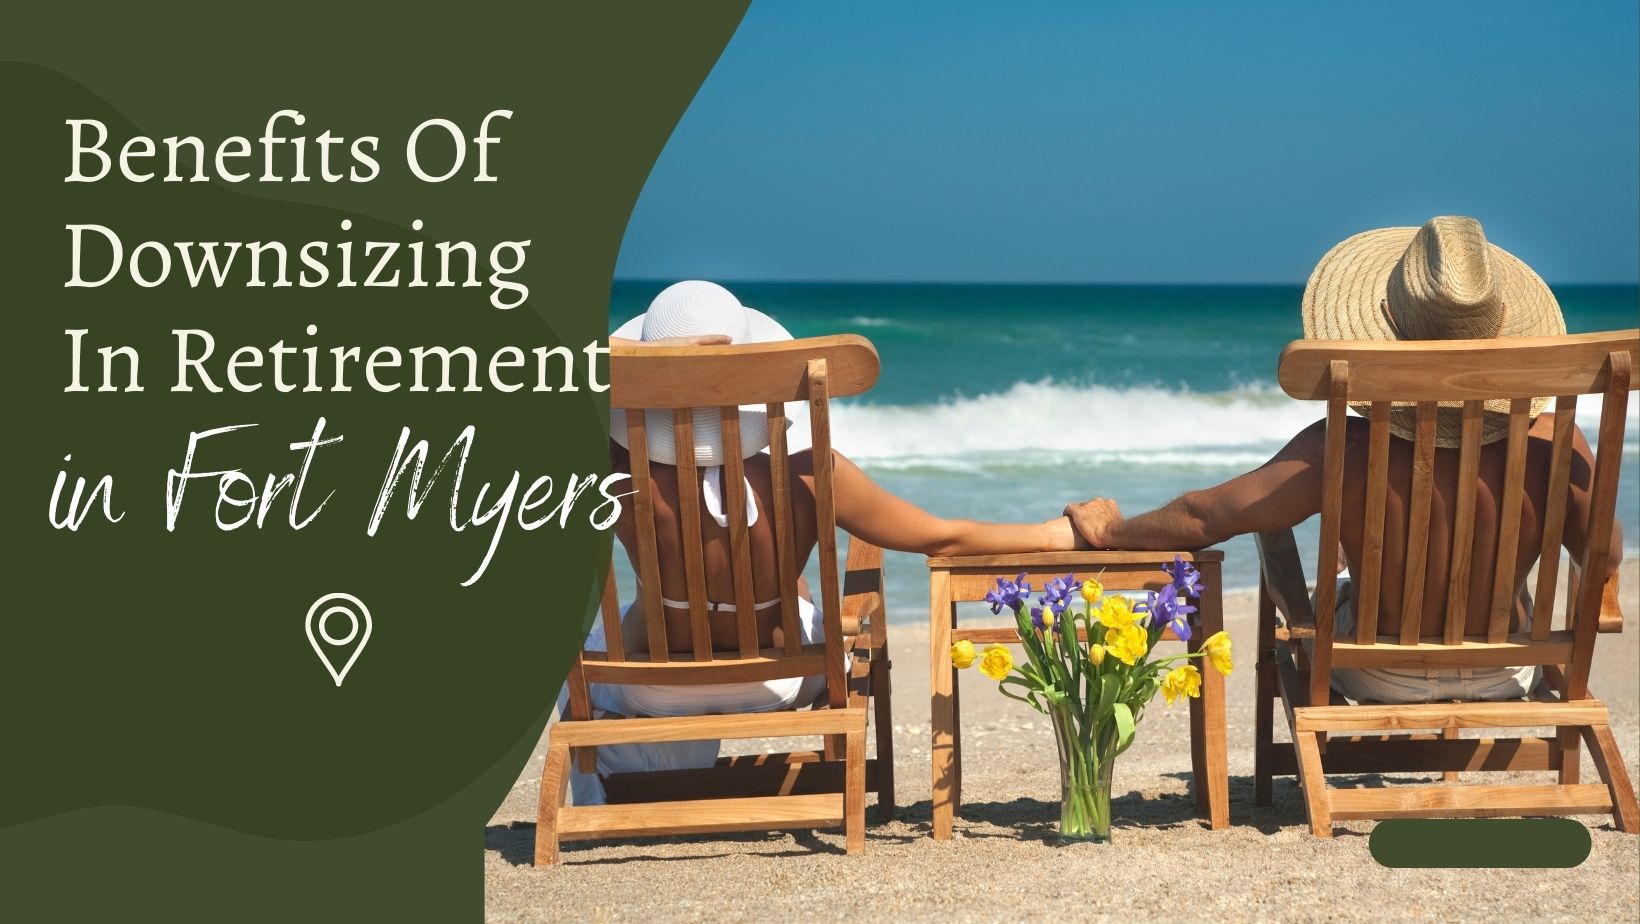 Benefits Of Downsizing In Retirement